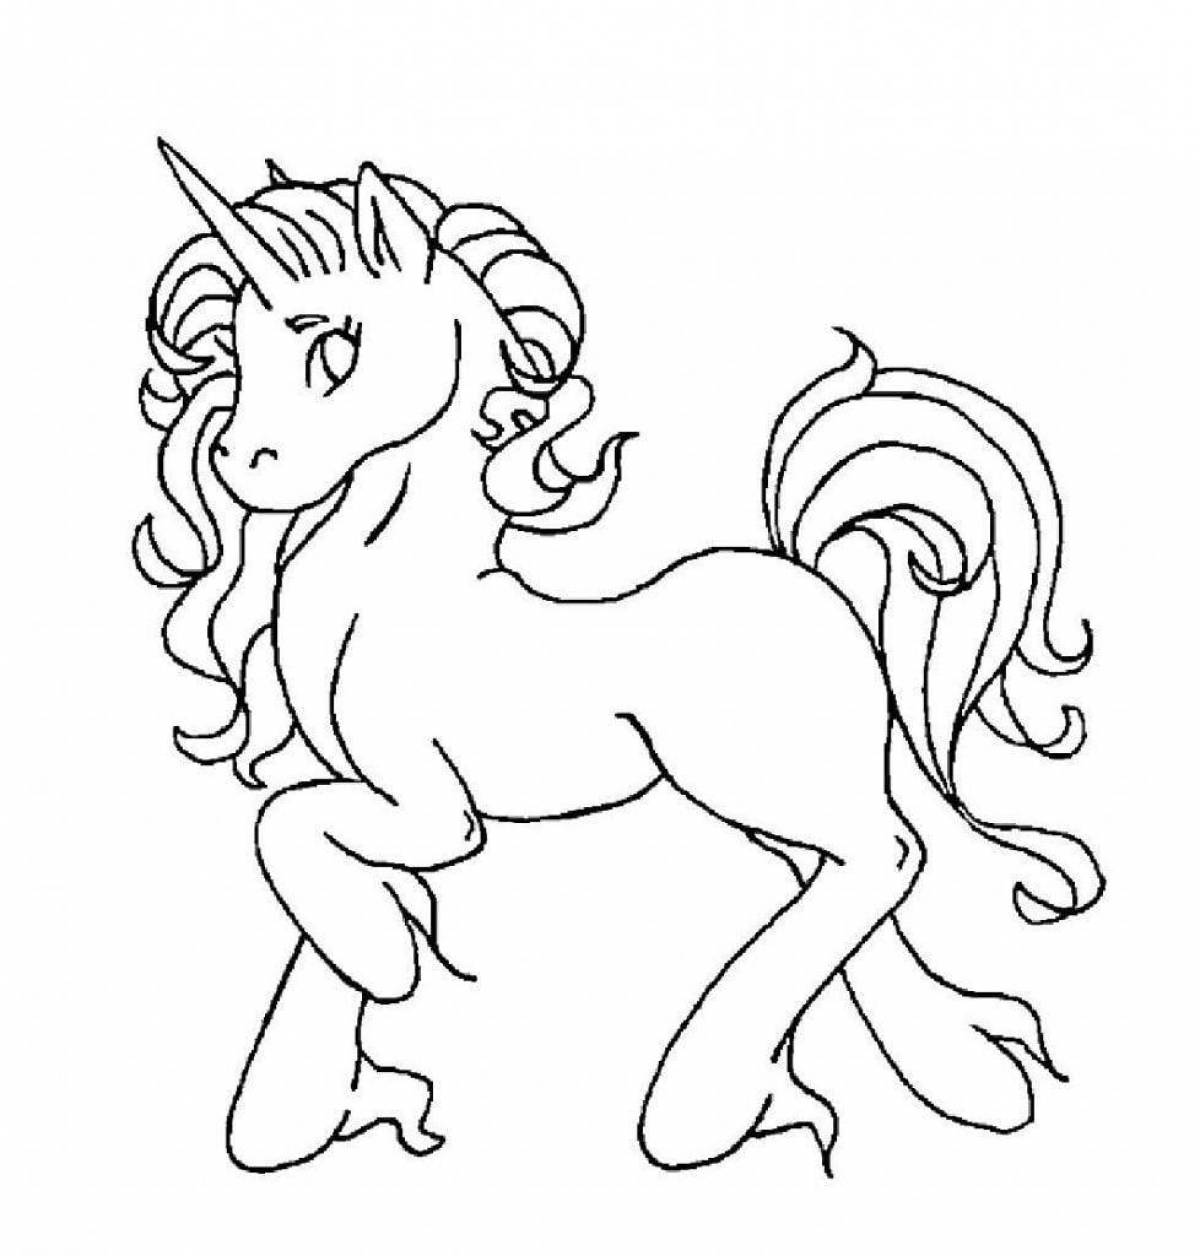 Sublime coloring page horse unicorn